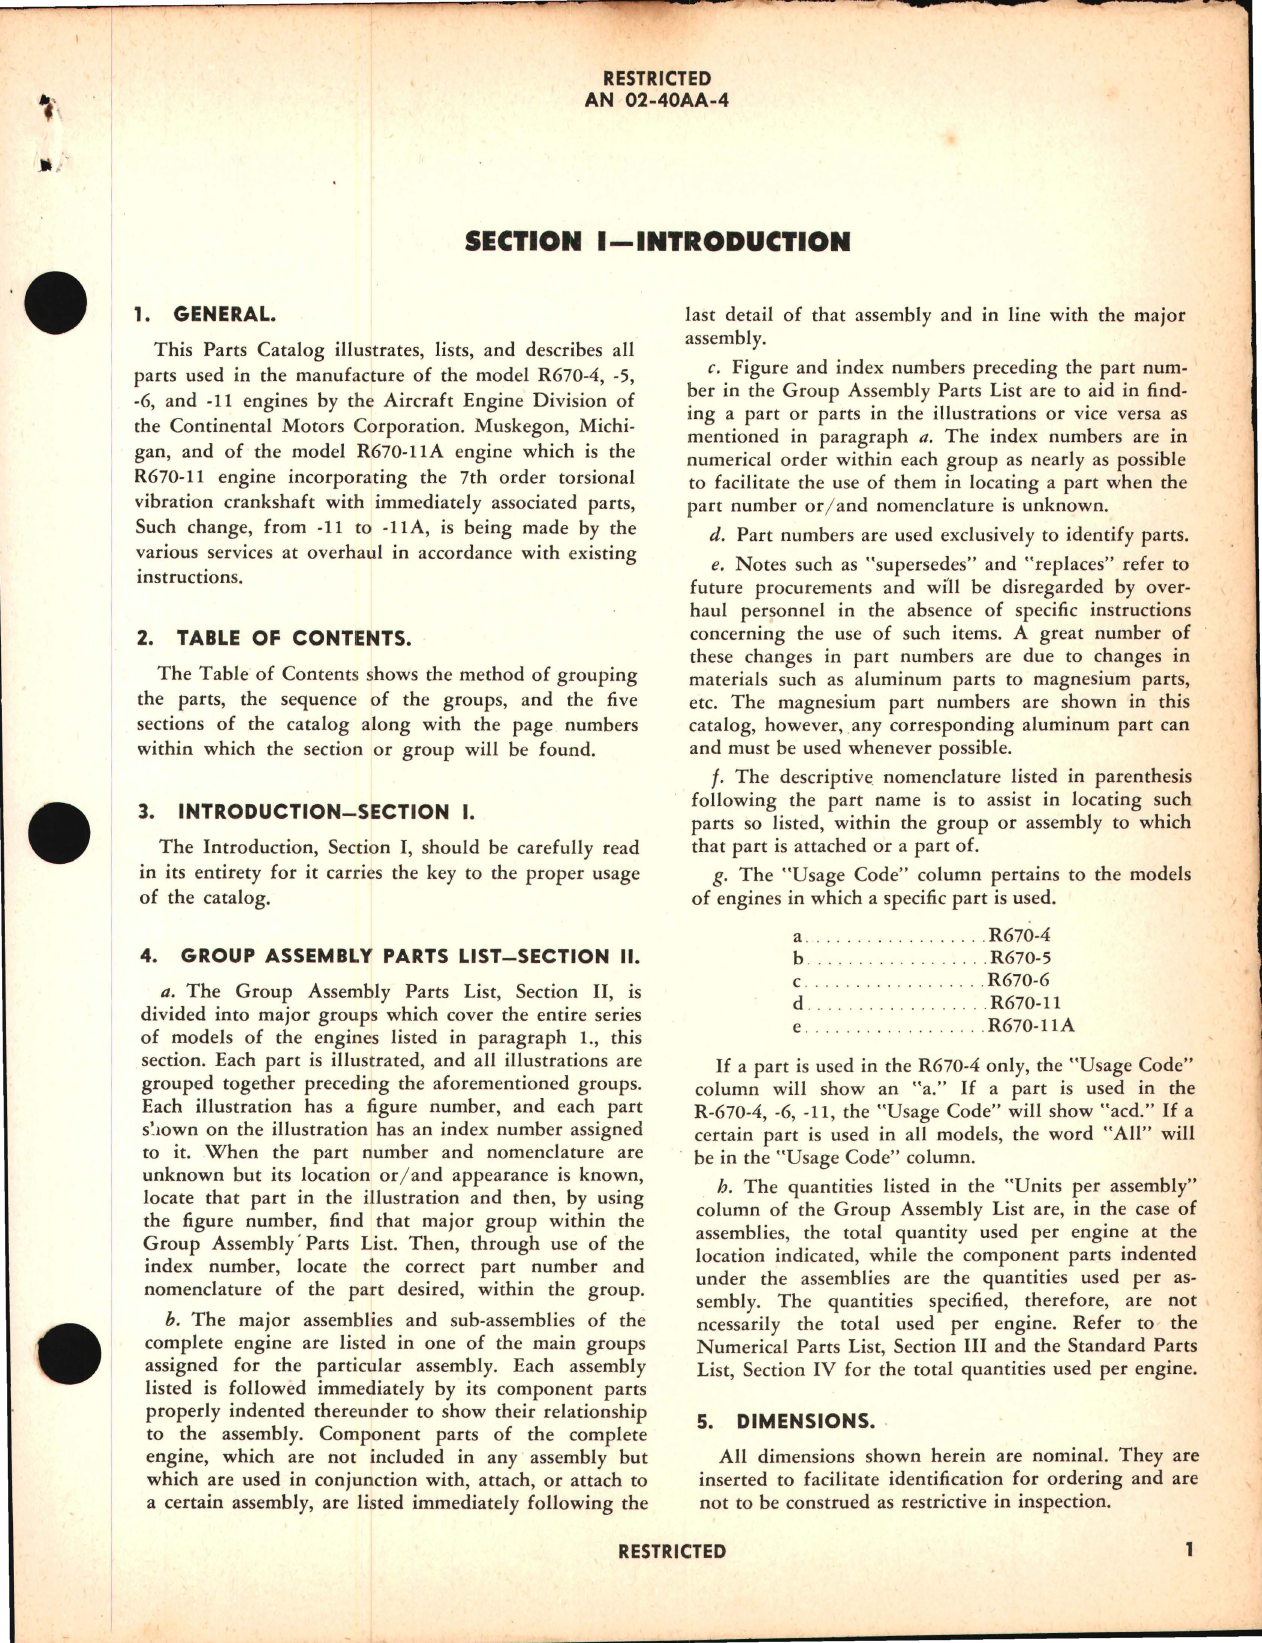 Sample page 5 from AirCorps Library document: Parts Catalog for Aircraft Engines R-670-4, R-670-5, R-670-6, and R-670-11